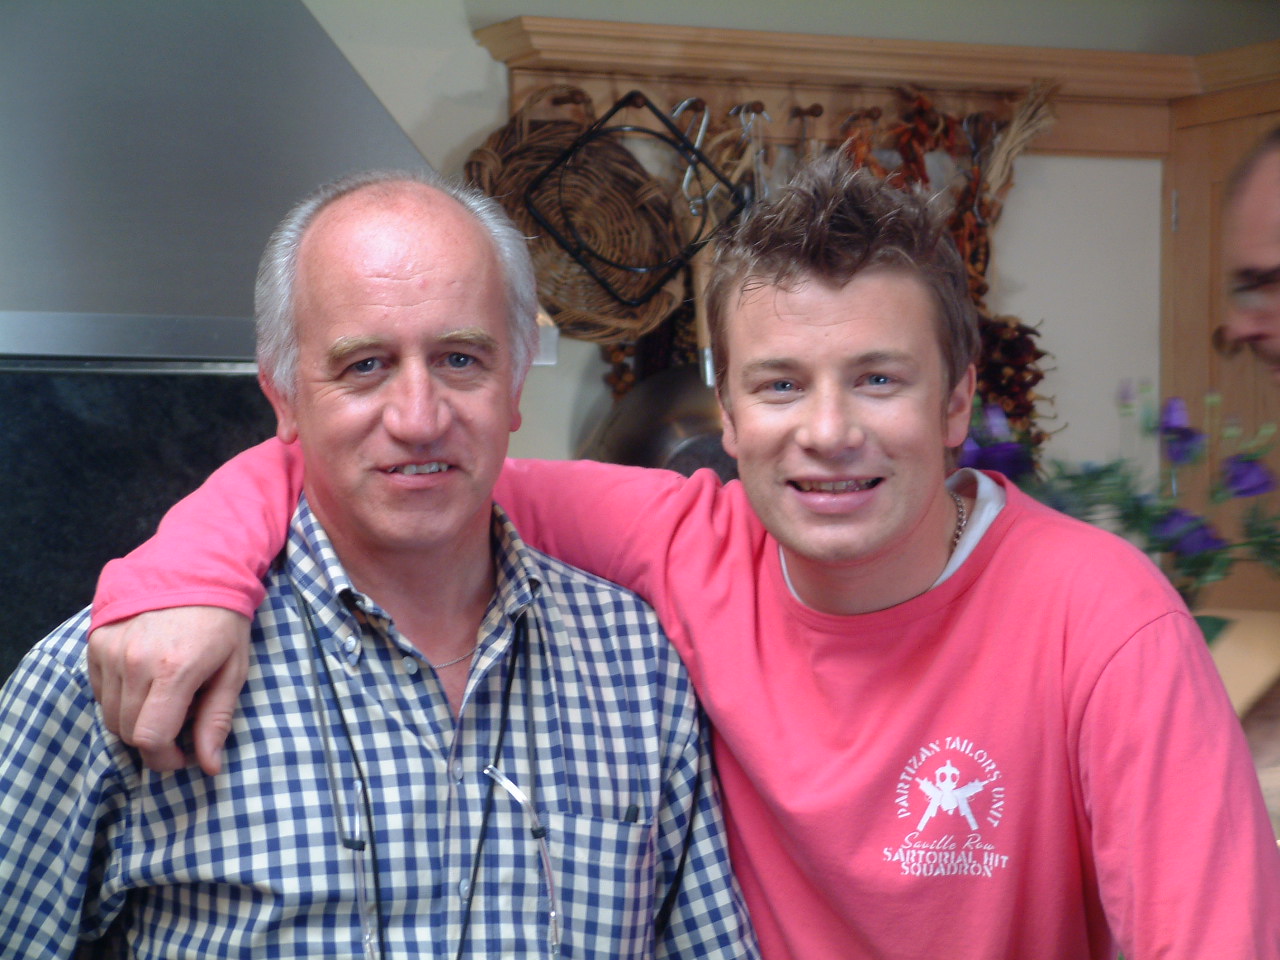 Me with TV Chef Jamie Oliver. Directing him for TV.